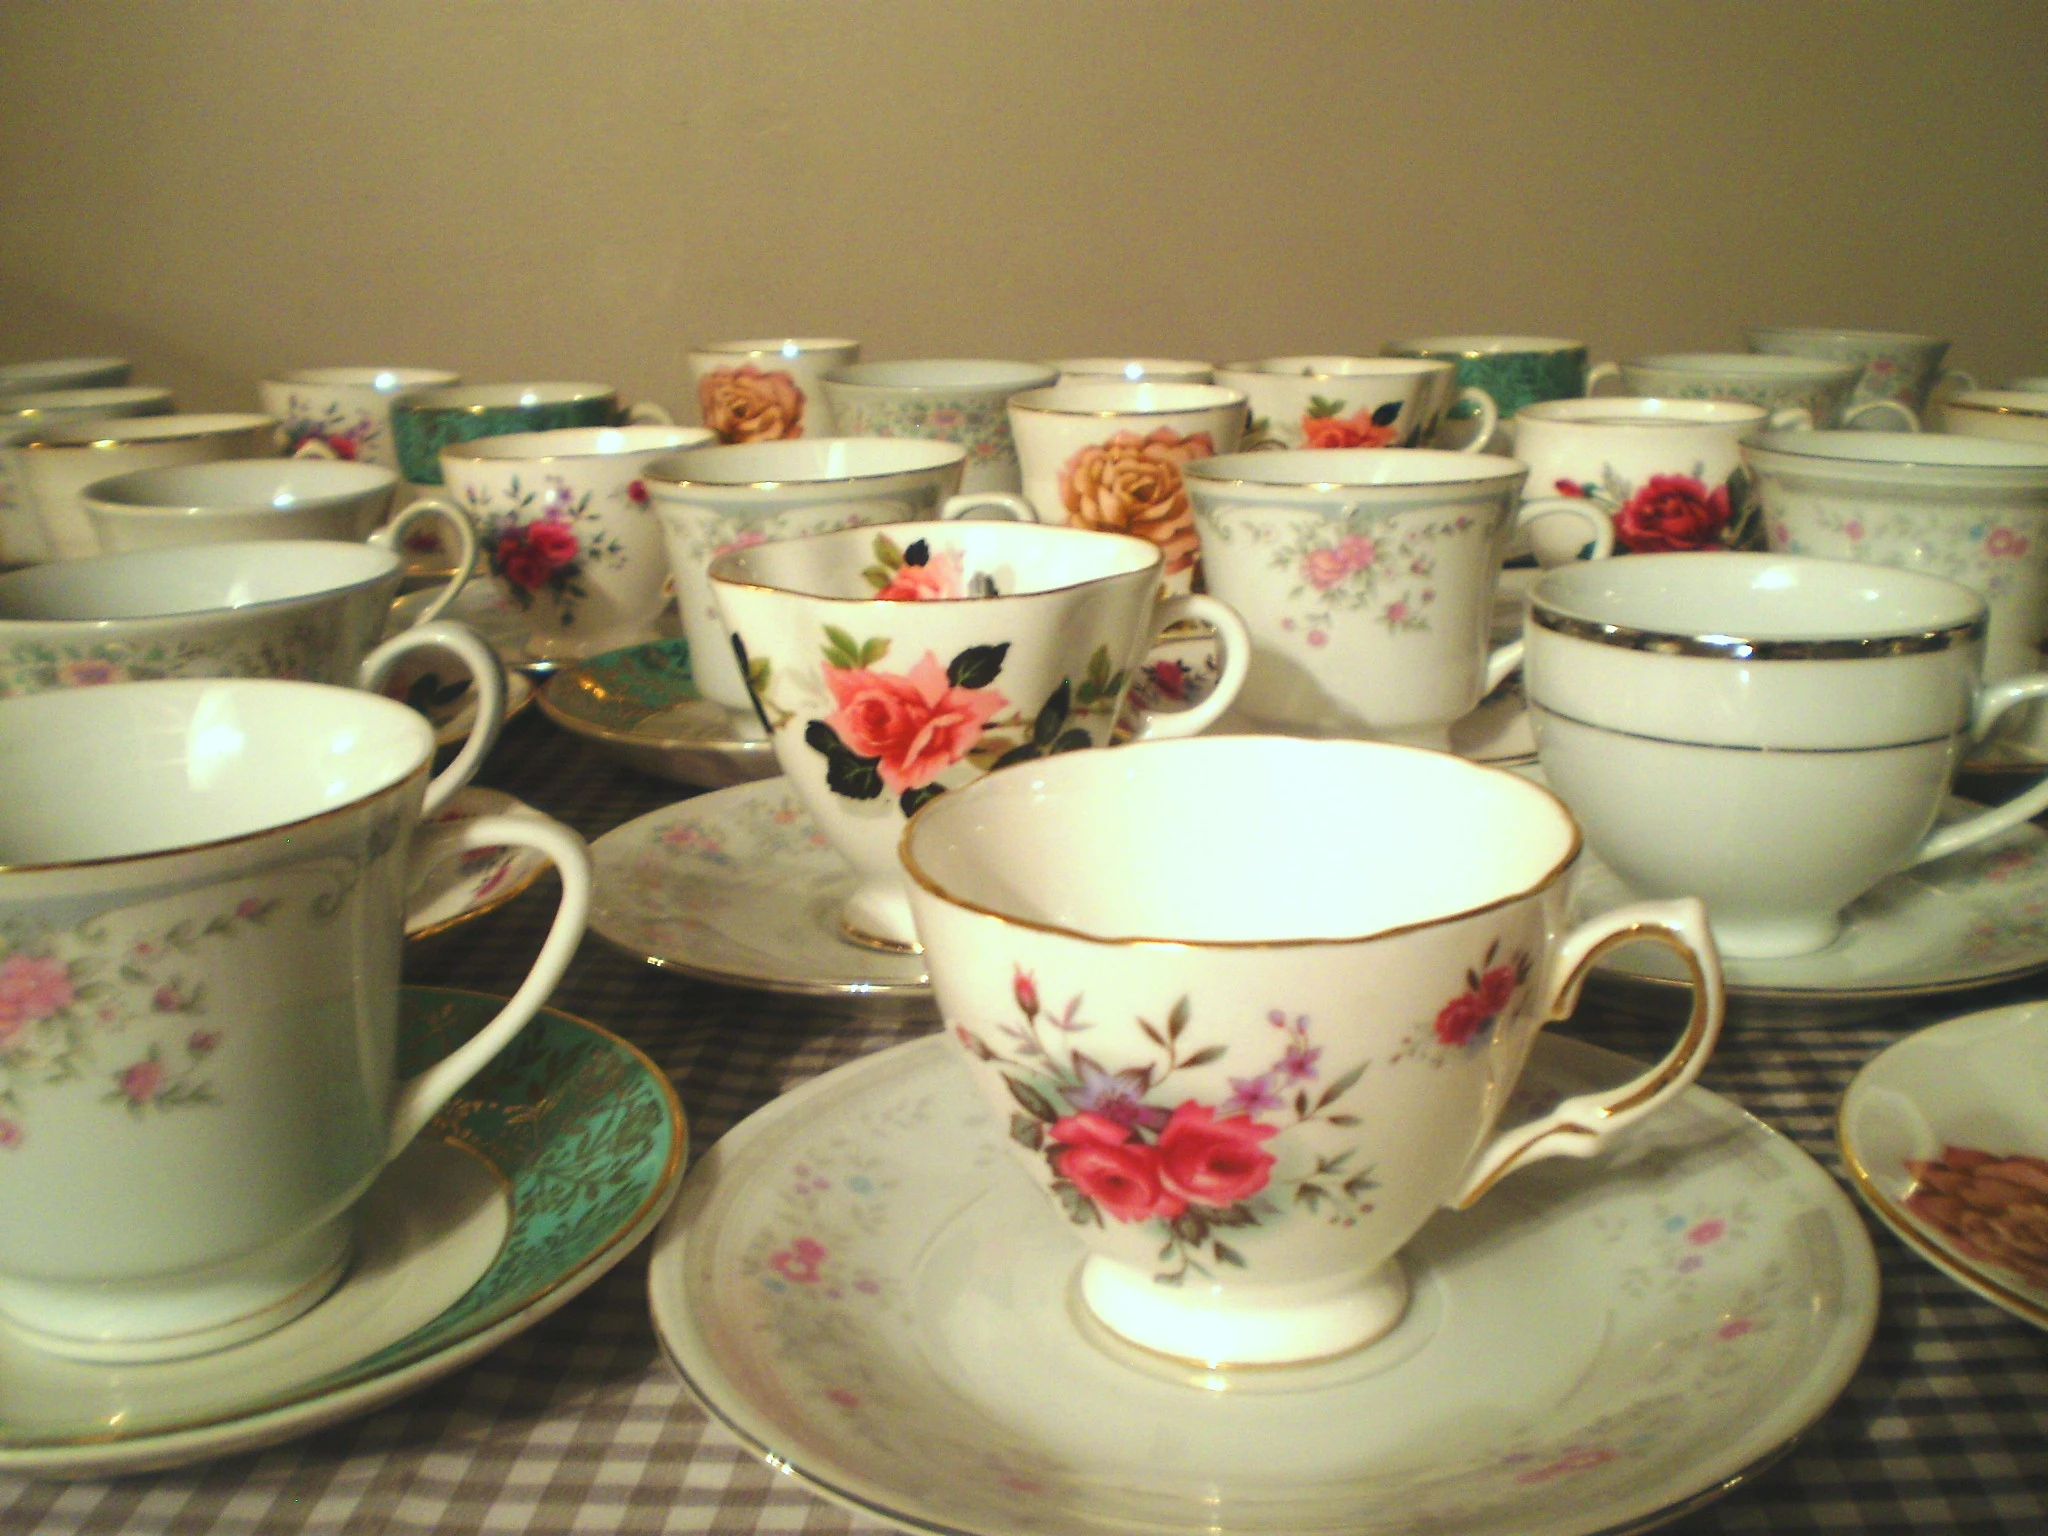 teacups and saucers on gingham cloth